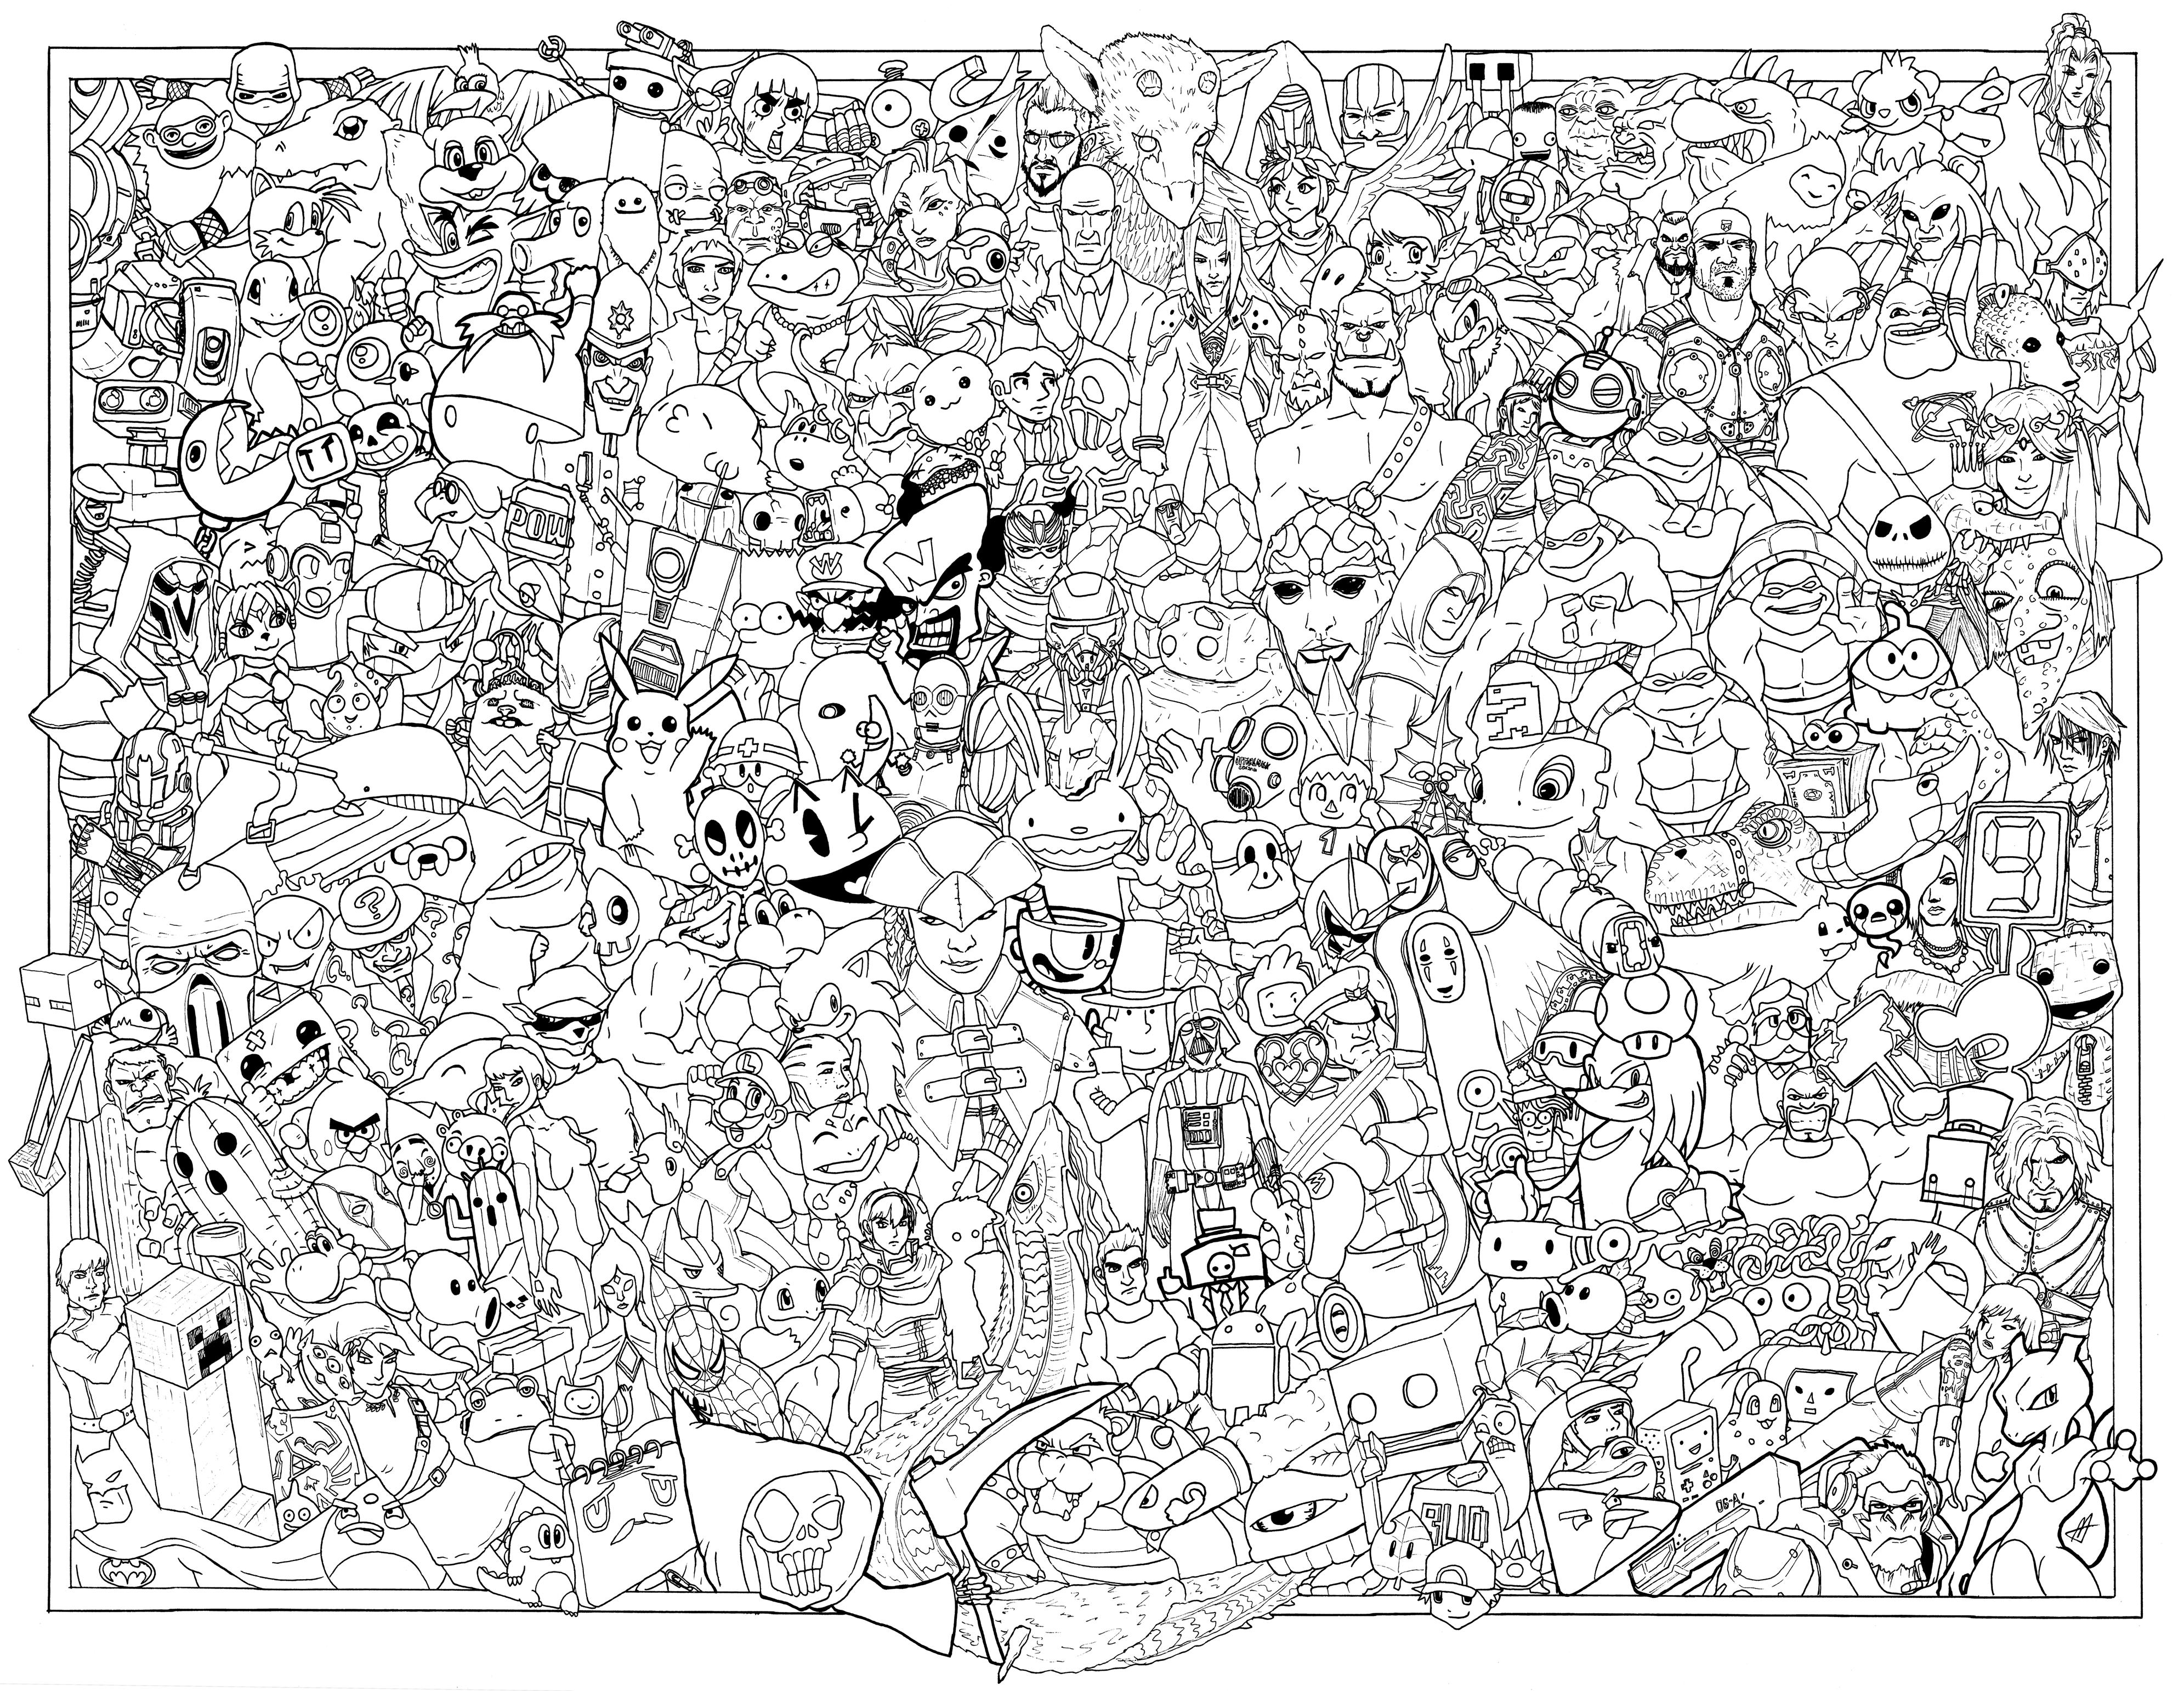 Video game coloring poster by austin alander